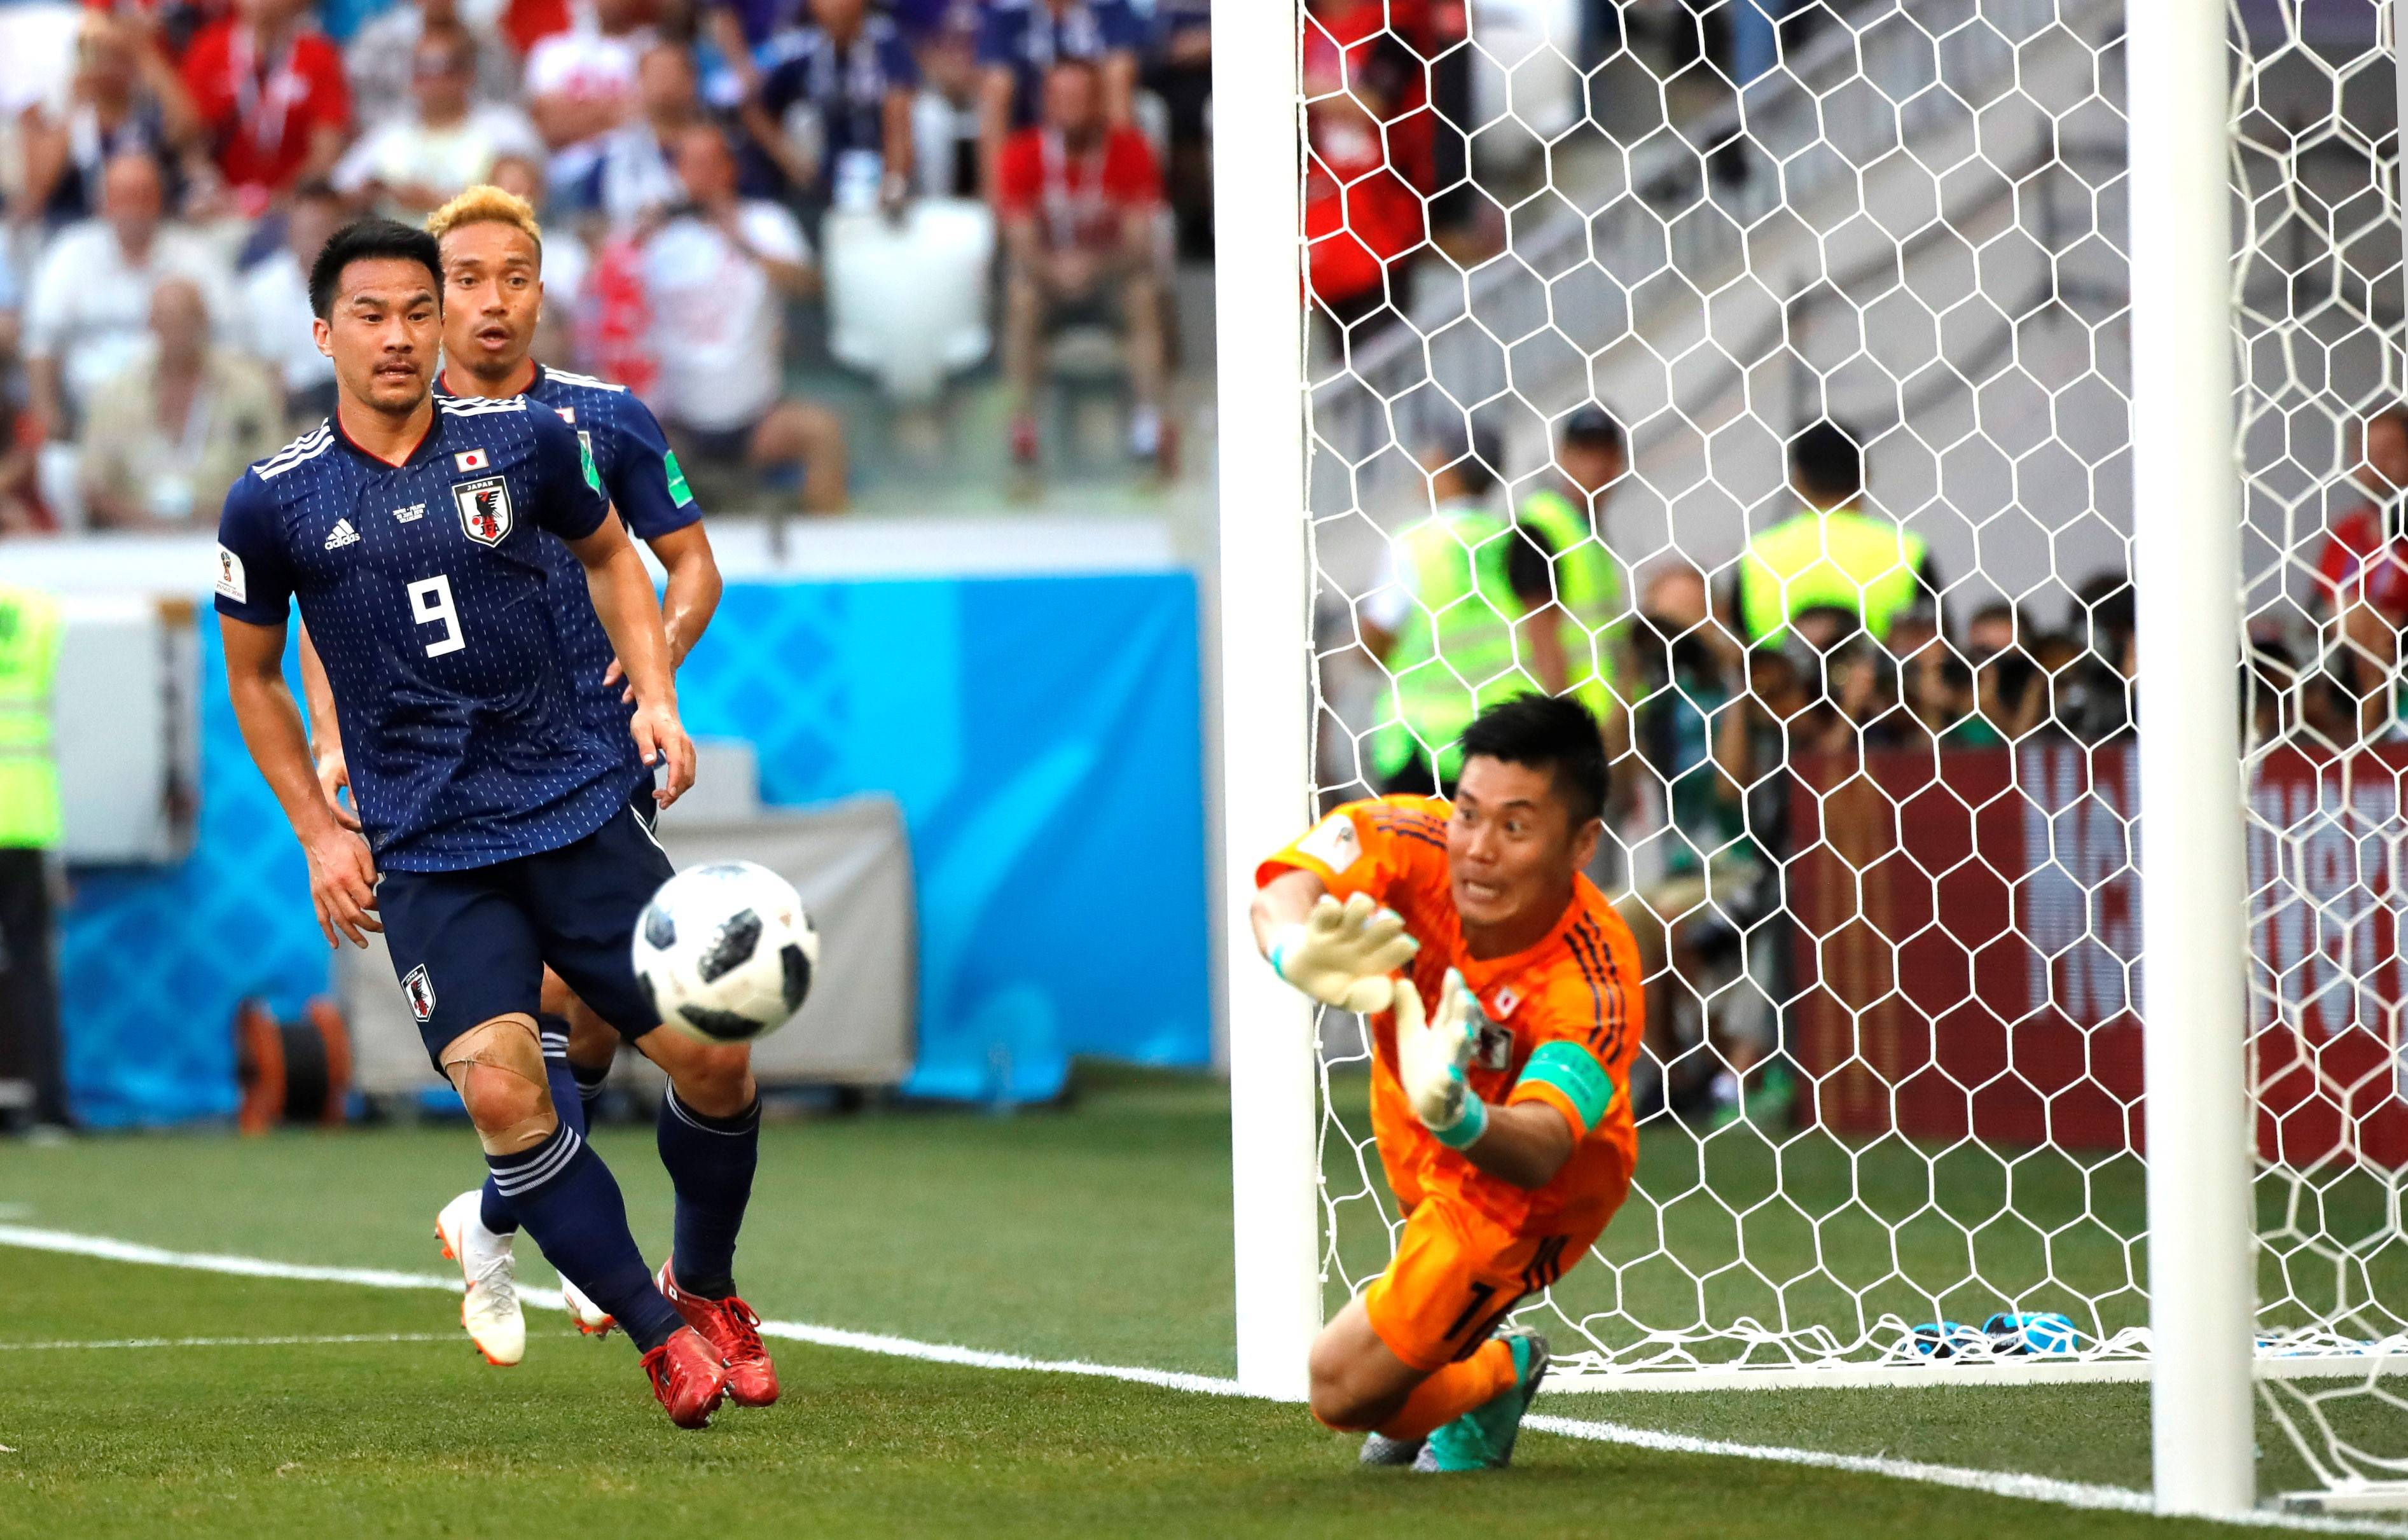 Fair play points send Japan to knockout stage despite Poland loss